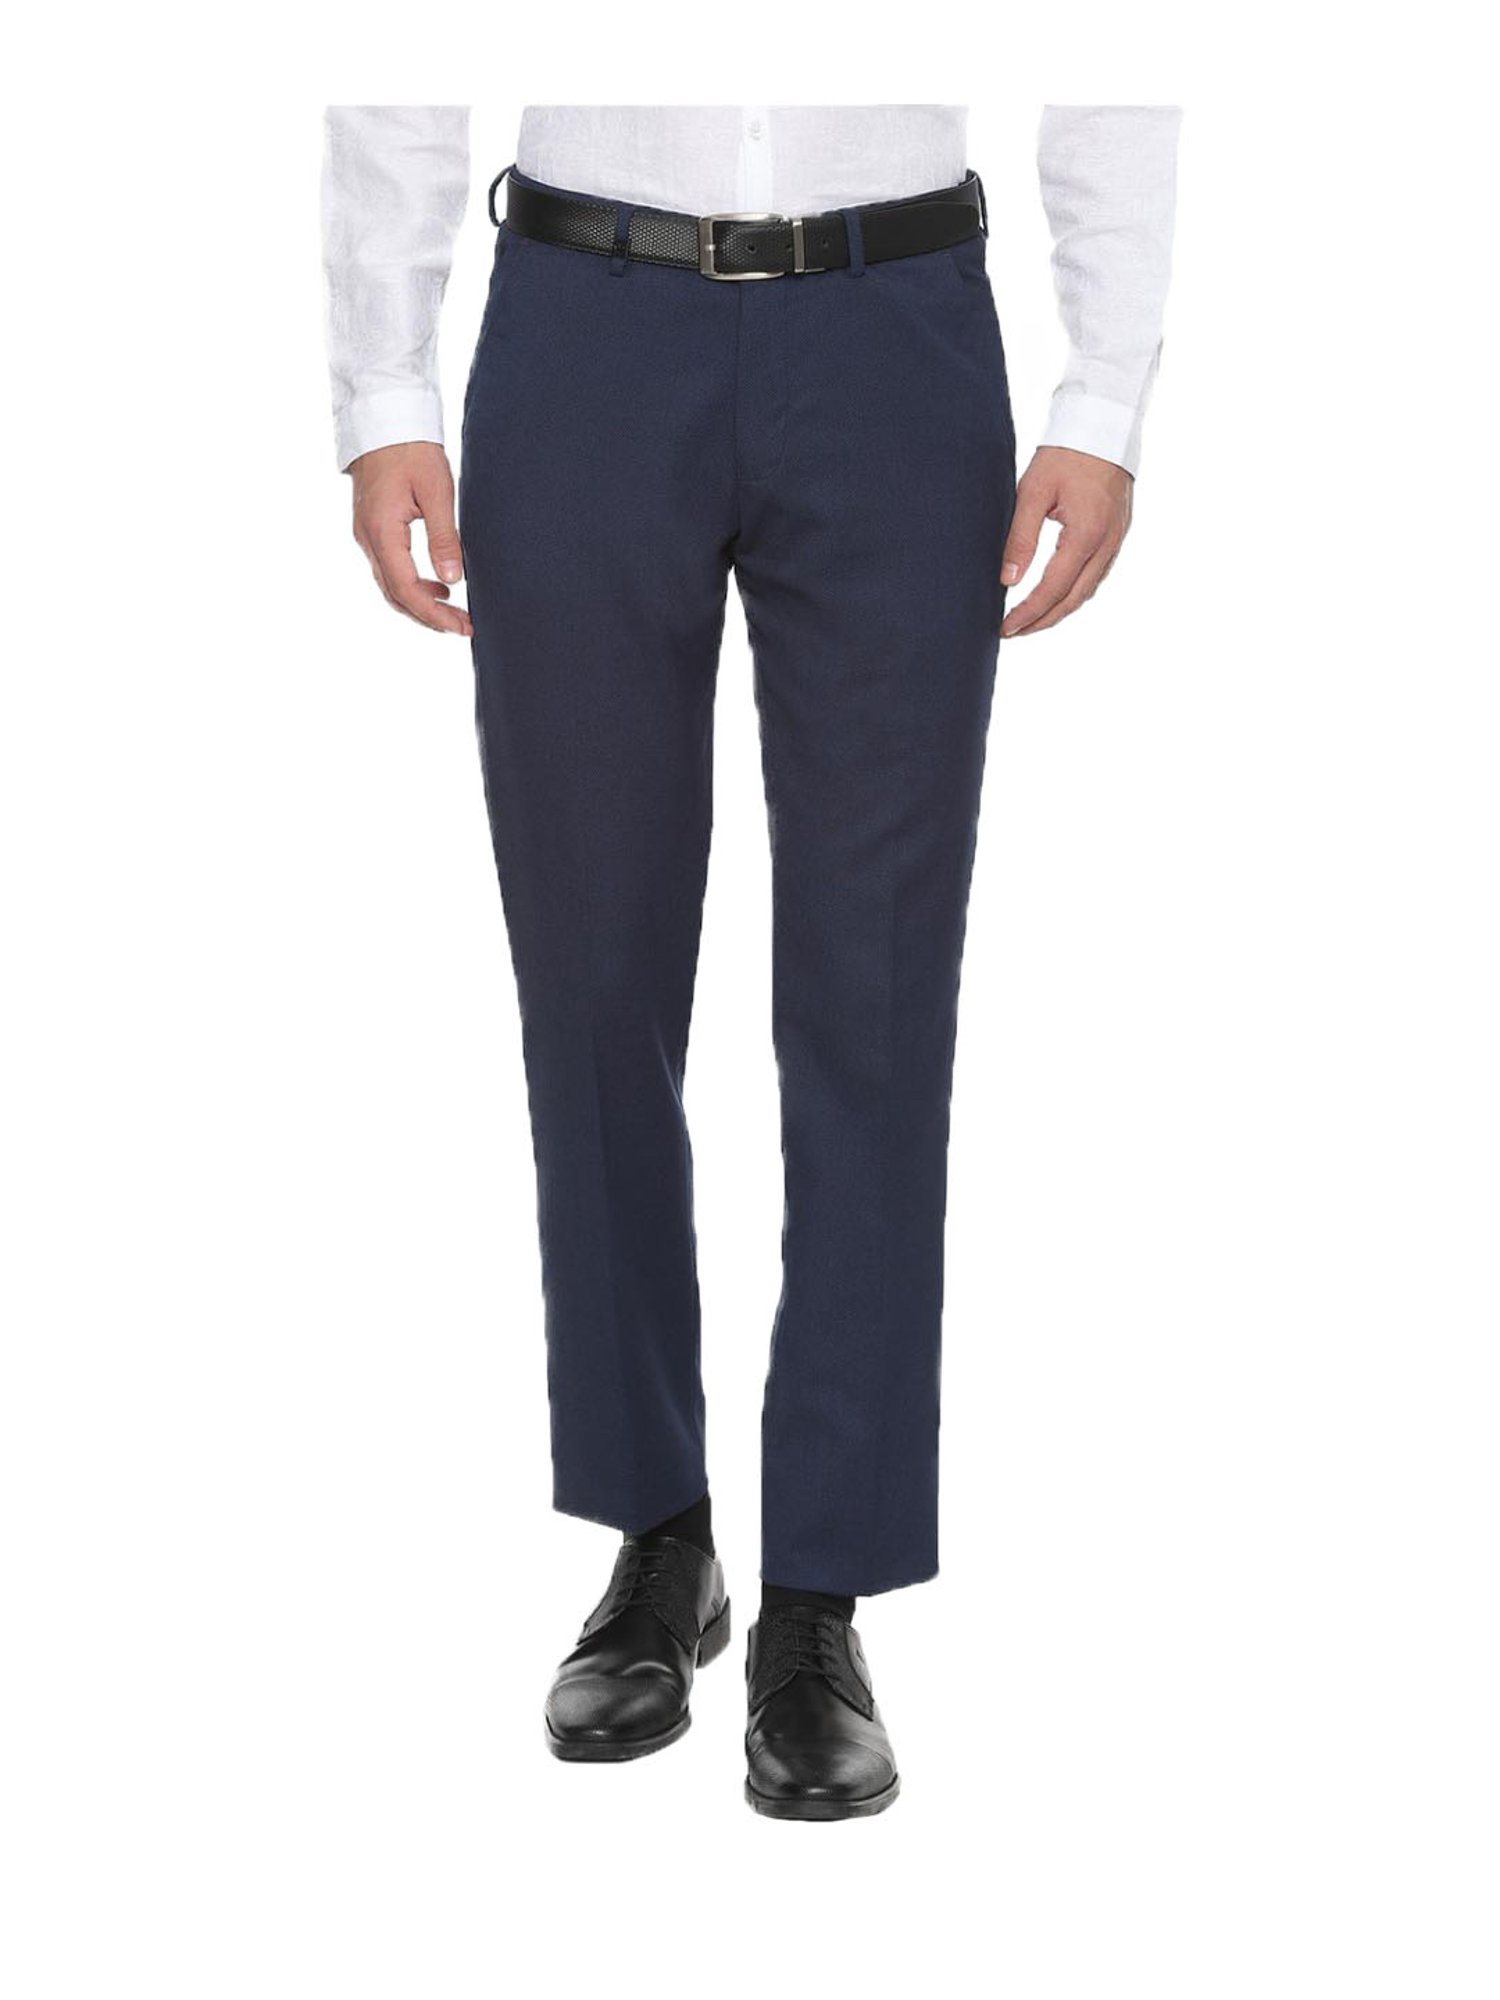 Buy Stylish And Comfortable Pair Of Trousers These Trousers Come In A Range  Of Styles Including Skinny Straight Bootcut And Wideleg So Youre  Sure To Find A Pair That Suits Your Individual